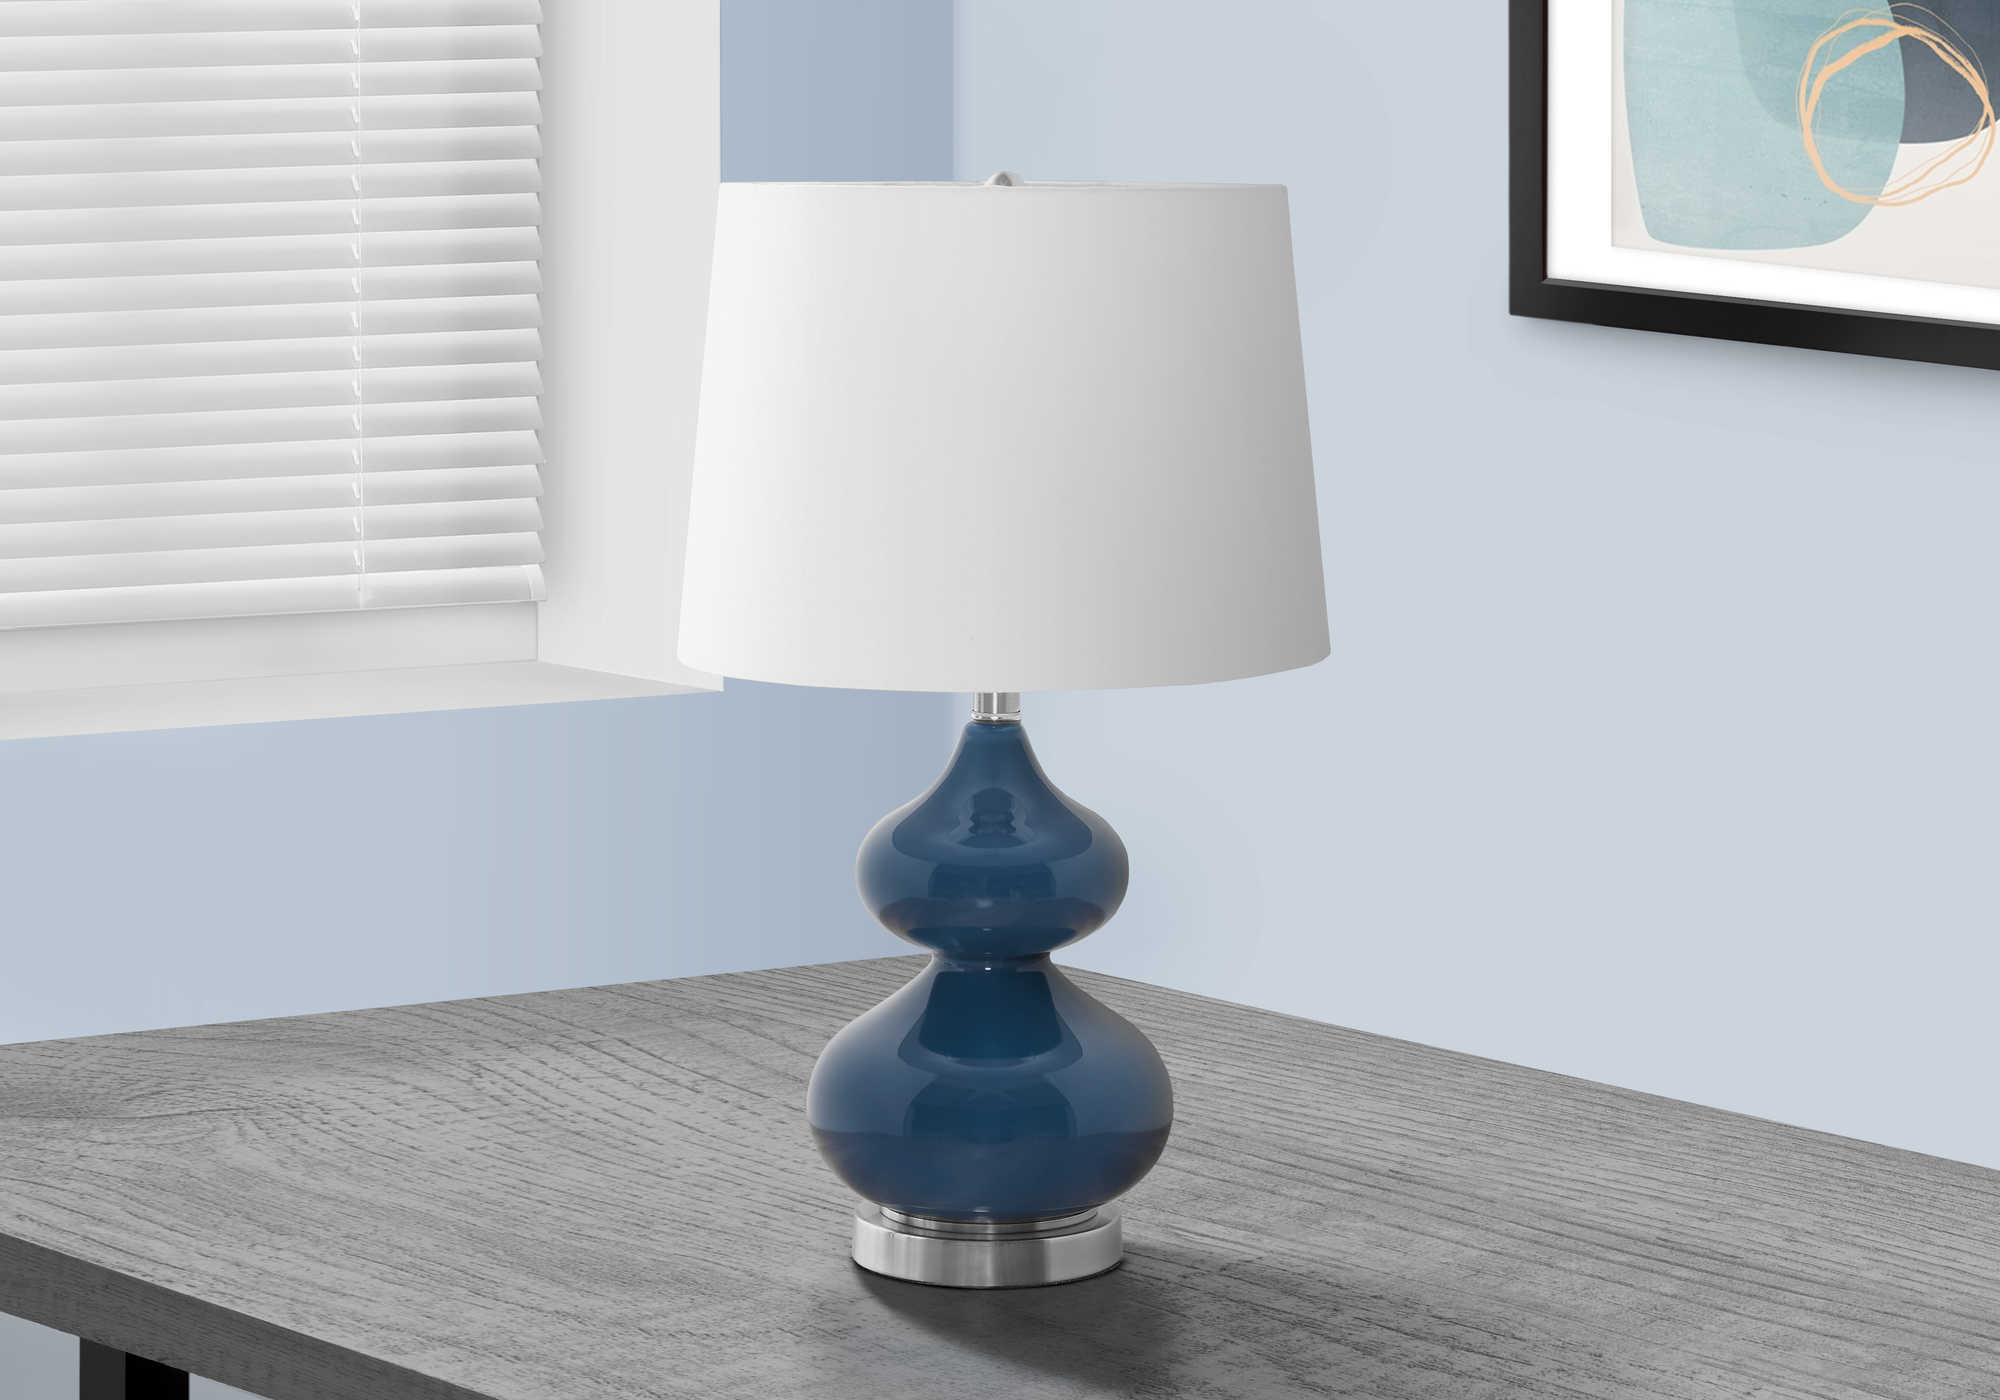 LIGHTING - 24"H TABLE LAMP BLUE GLASS / IVORY SHADE